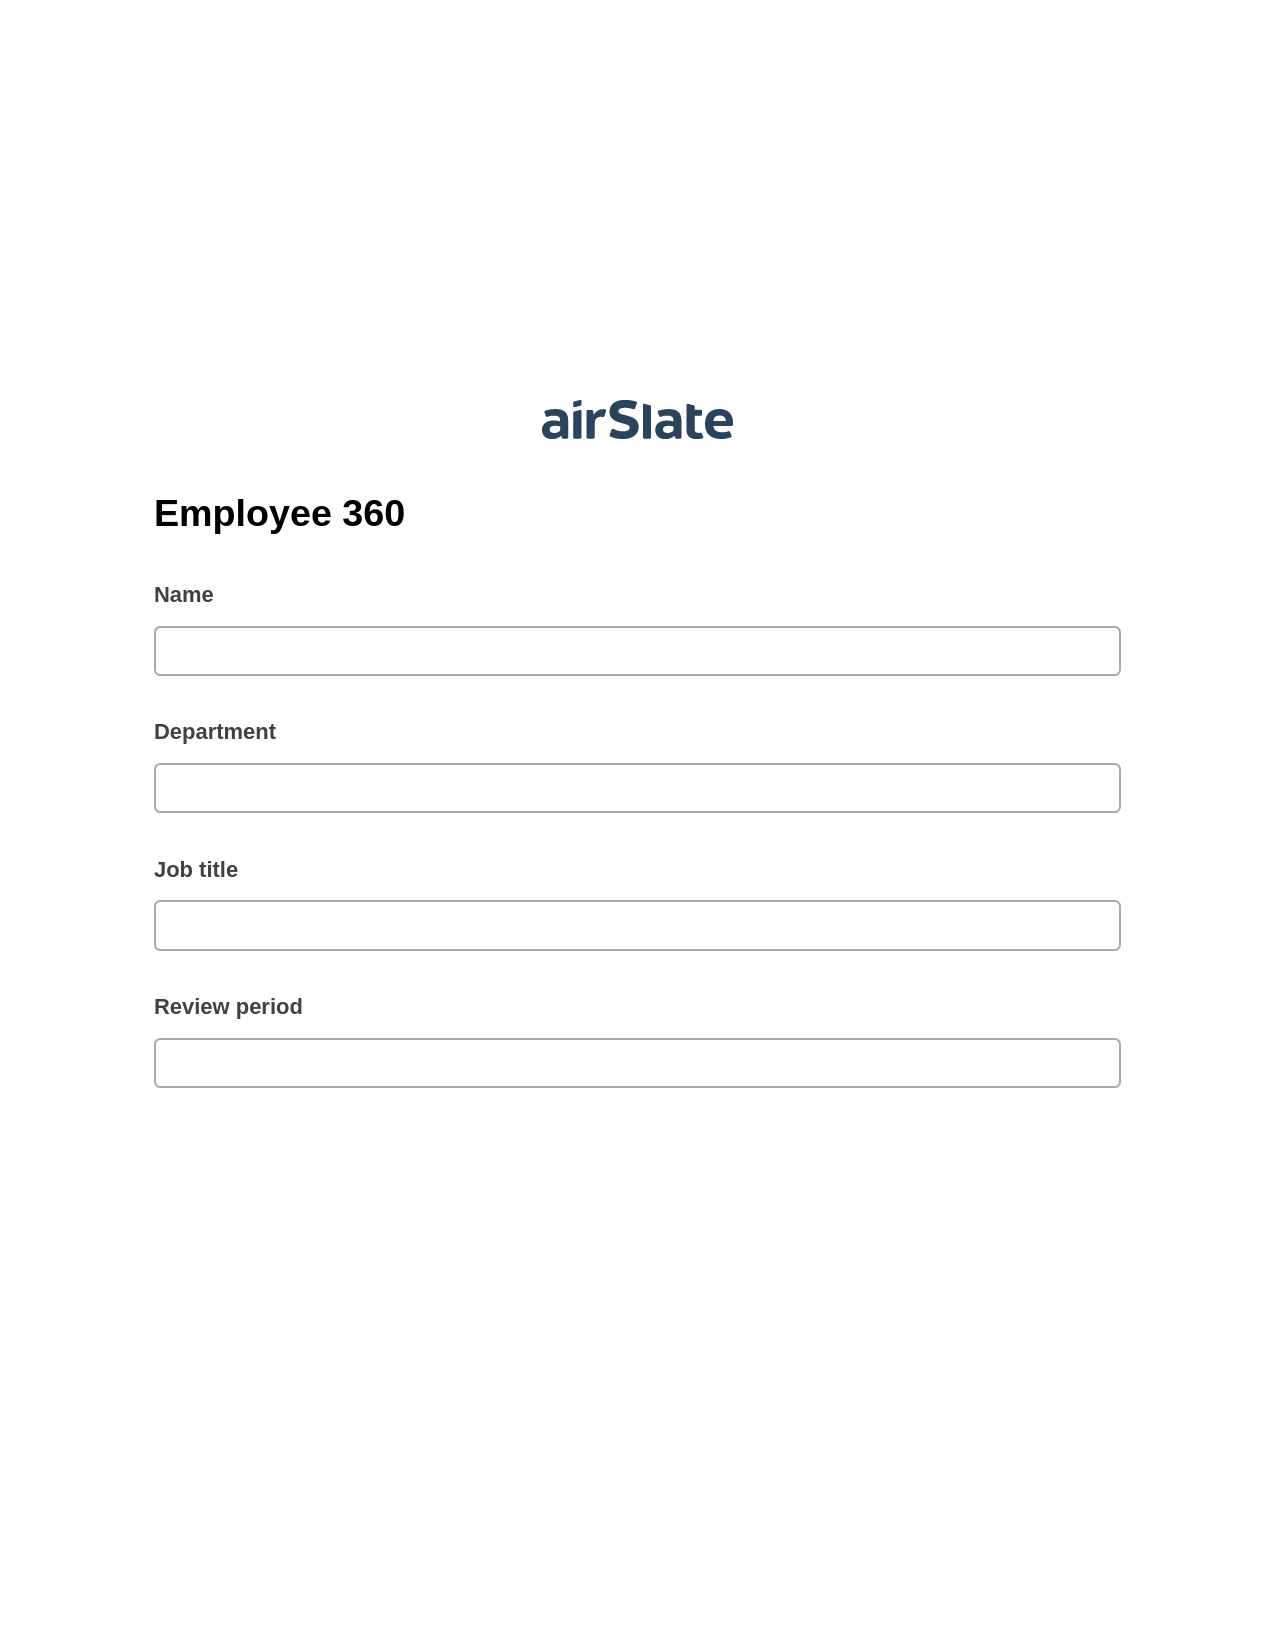 Employee 360 Pre-fill from MySQL Bot, Roles Reminder Bot, Archive to SharePoint Folder Bot